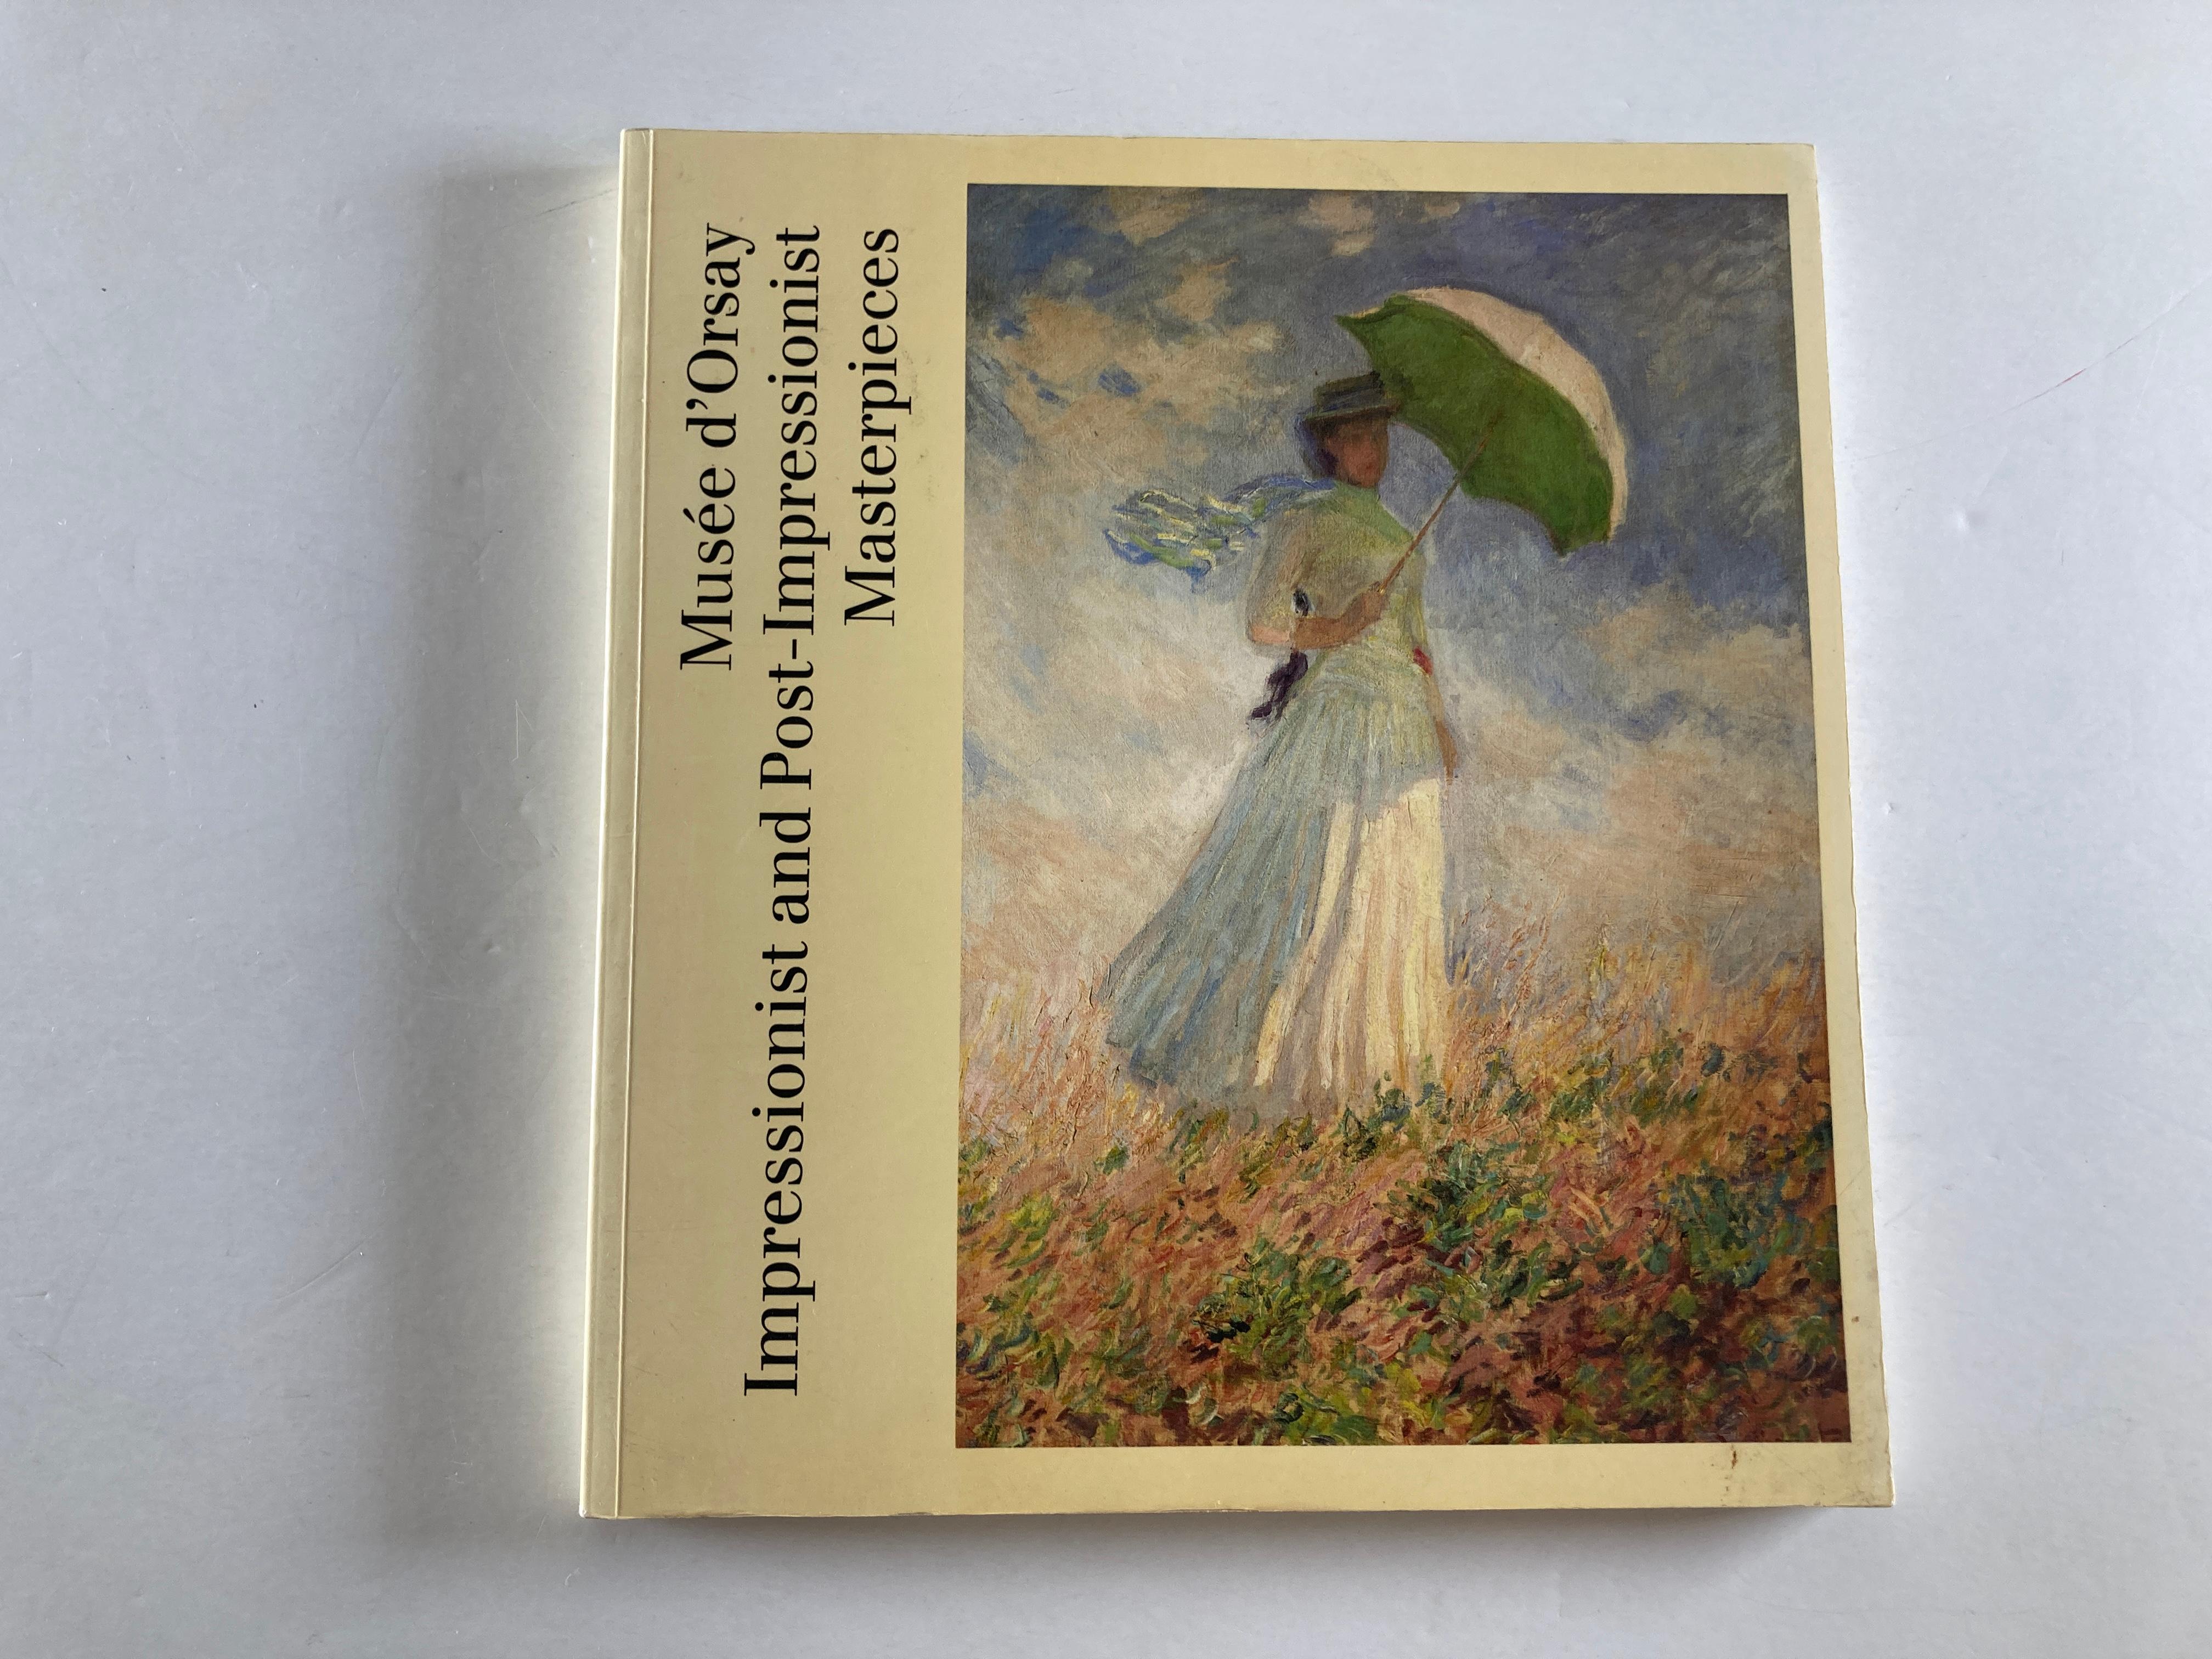 Impressionist and Post-Impressionist Masterpieces at the Musee d'Orsay
by Anne Distel, Genieve Lacambre, Sylvie Gache-Patin, et al.
Musee d'Orsay Impressionist and Post-Impressionist Masterpieces, Paperback, 1986. 200 pages, 93 color